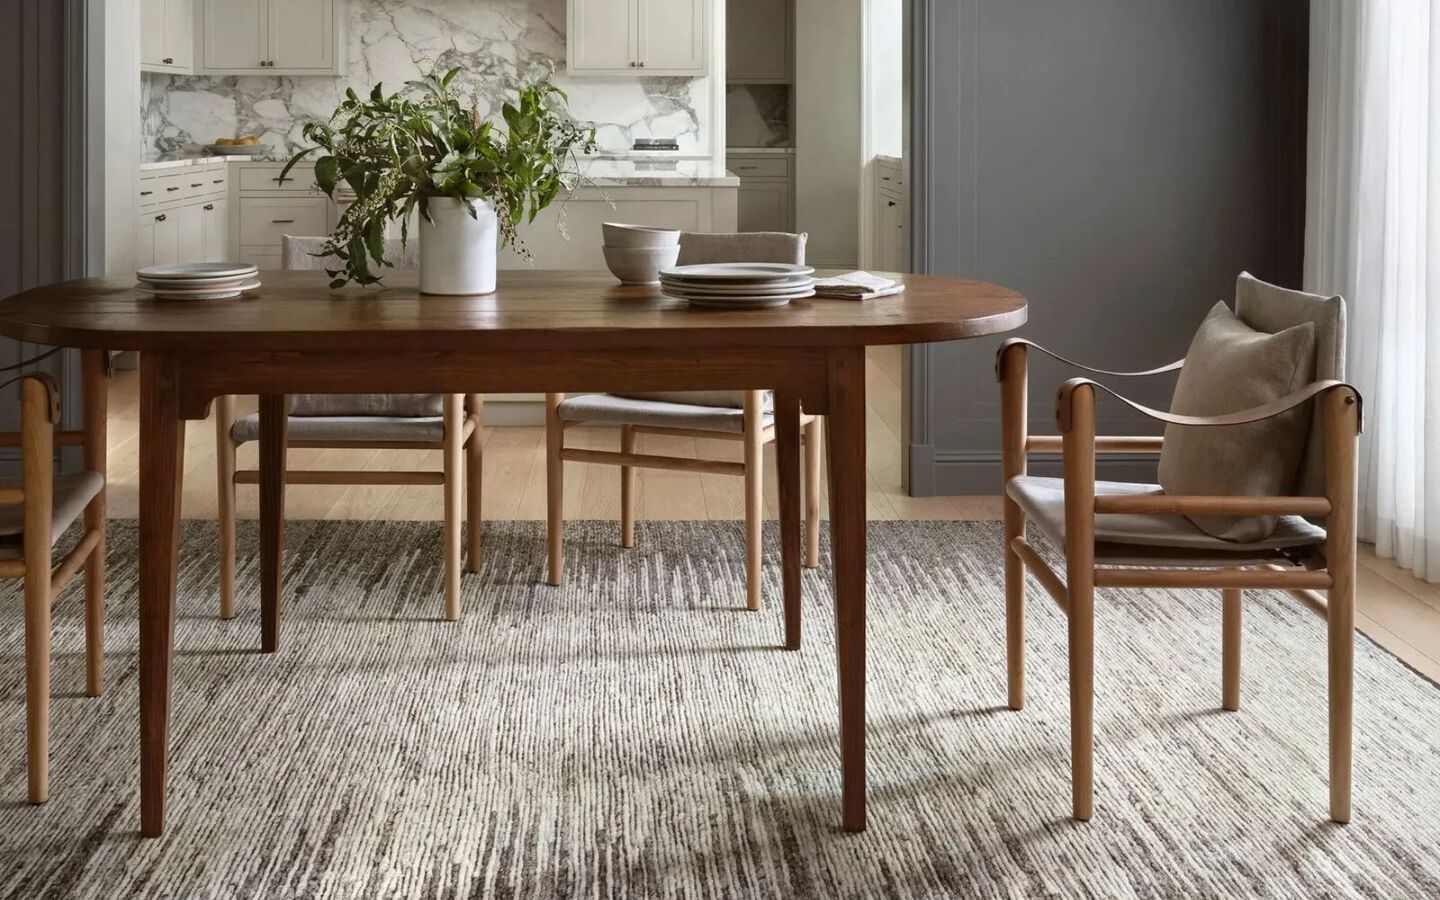 dining room setting with a grey patterned rug